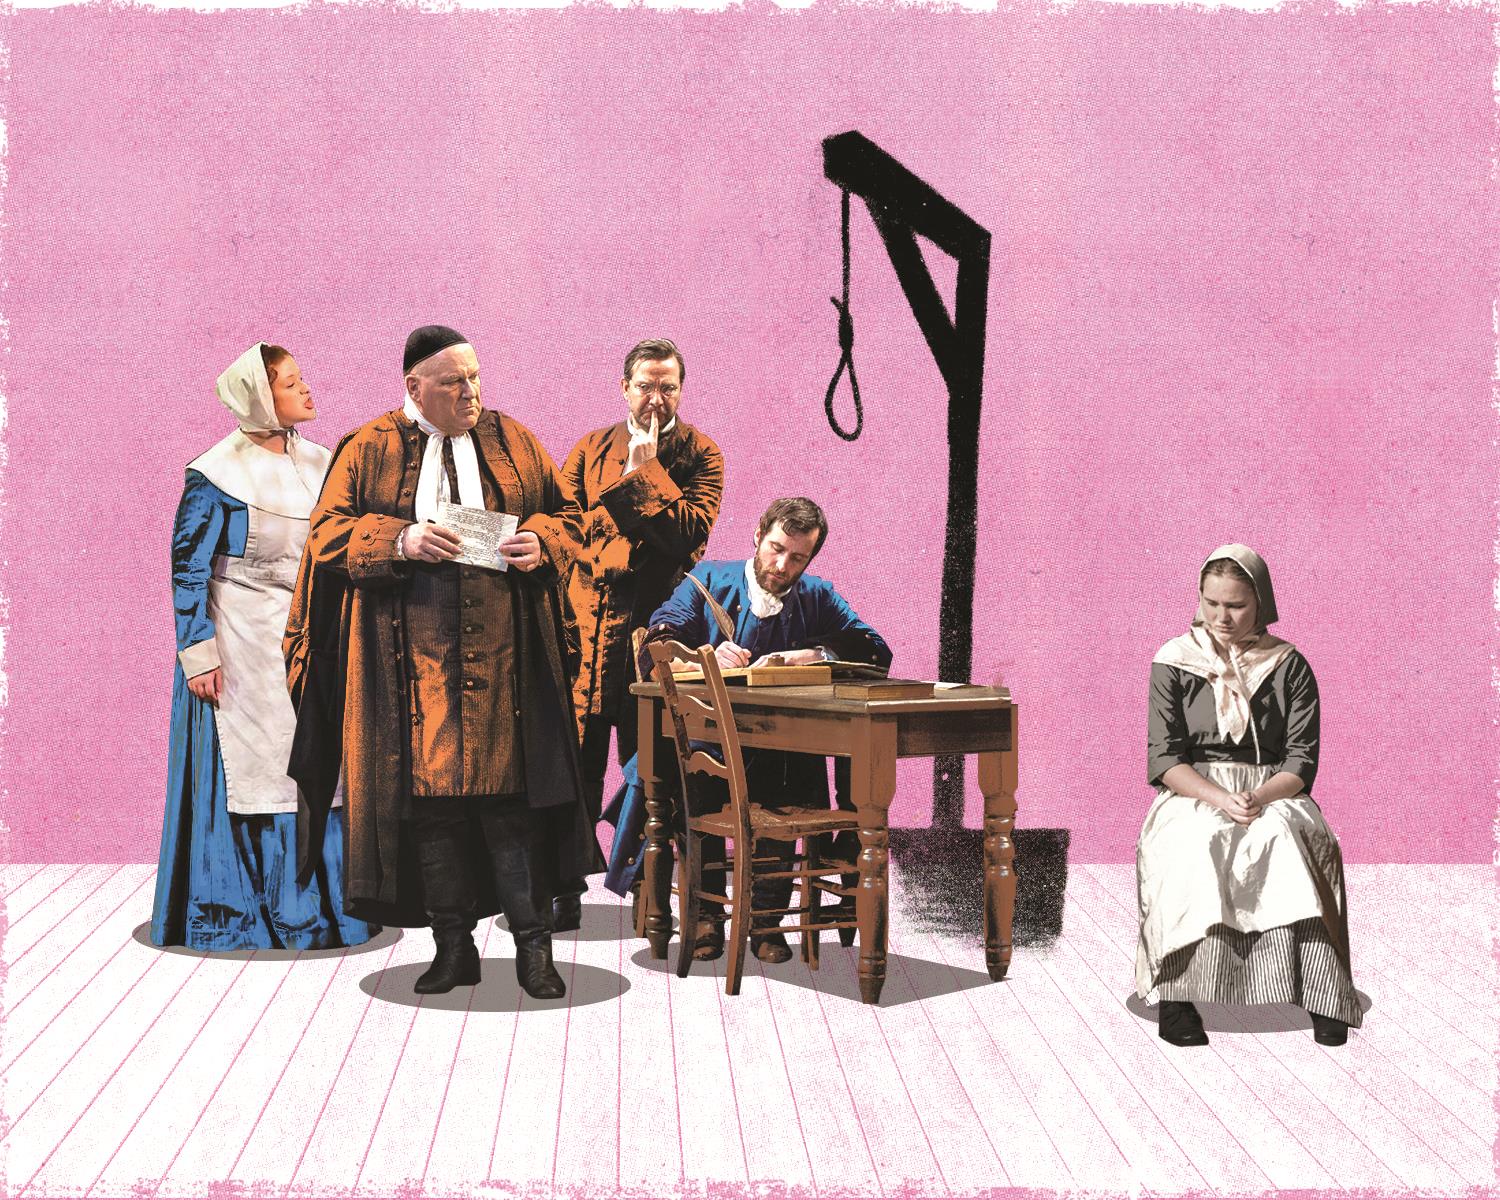 The Arthur Miller 1953 play The Crucible Focuses on Salem's Wicked